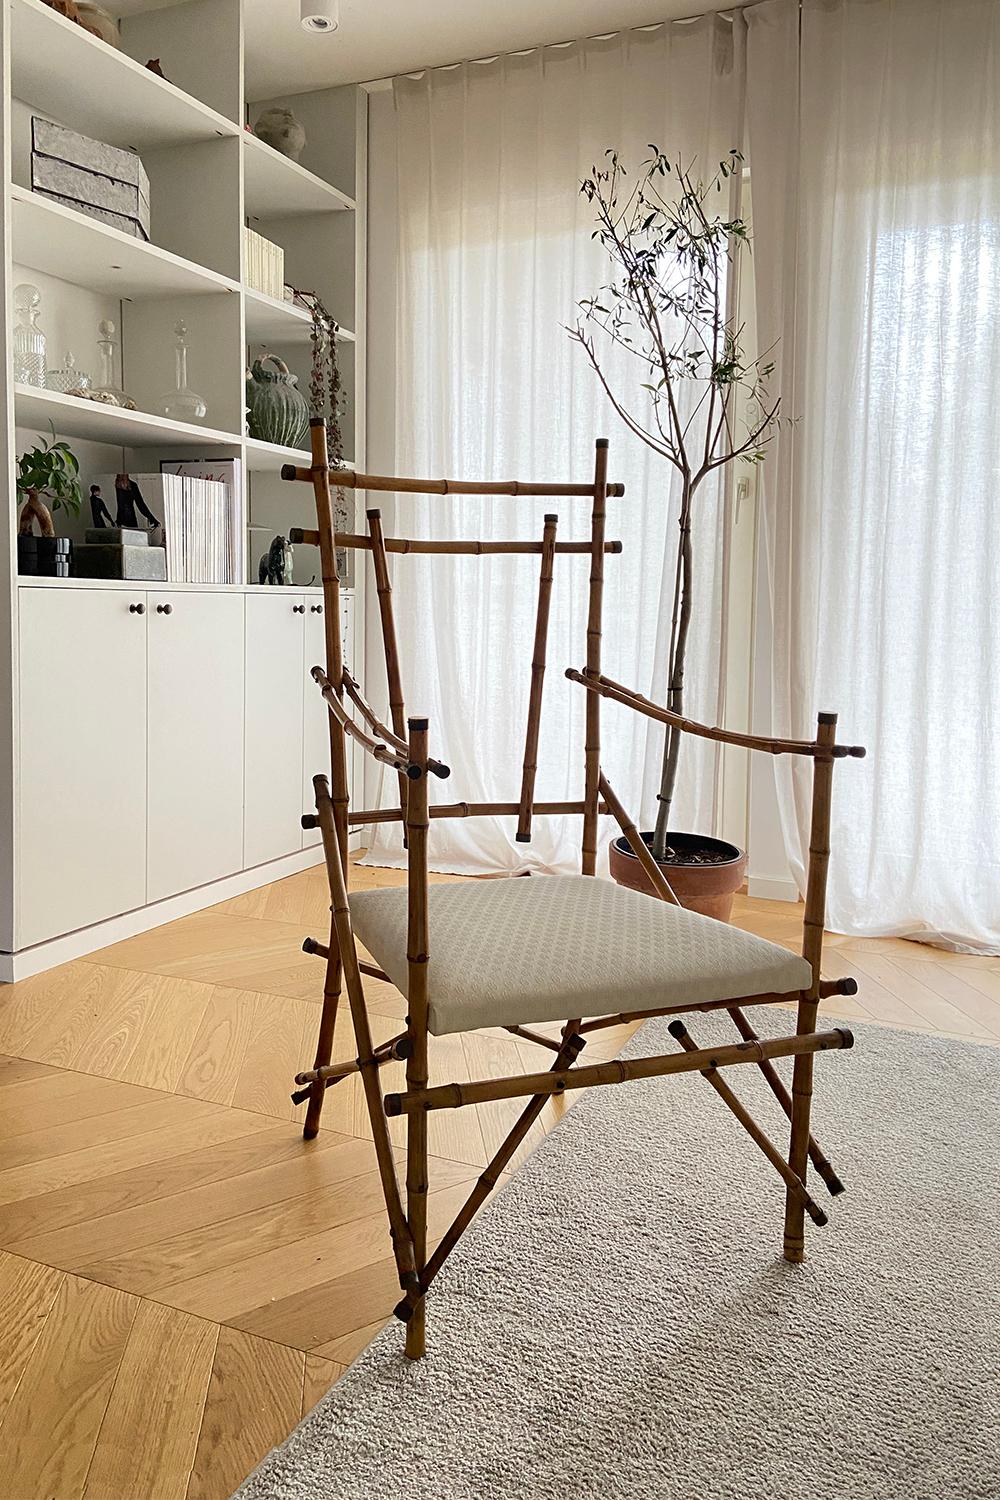 Beautiful delicate and rare Italian safari chair from circa 1970. This unique piece of furniture has been hand-crafted and is made from real bamboo with brass hardware. This armchair is a truly artisan-made piece!

The bamboo structure is still